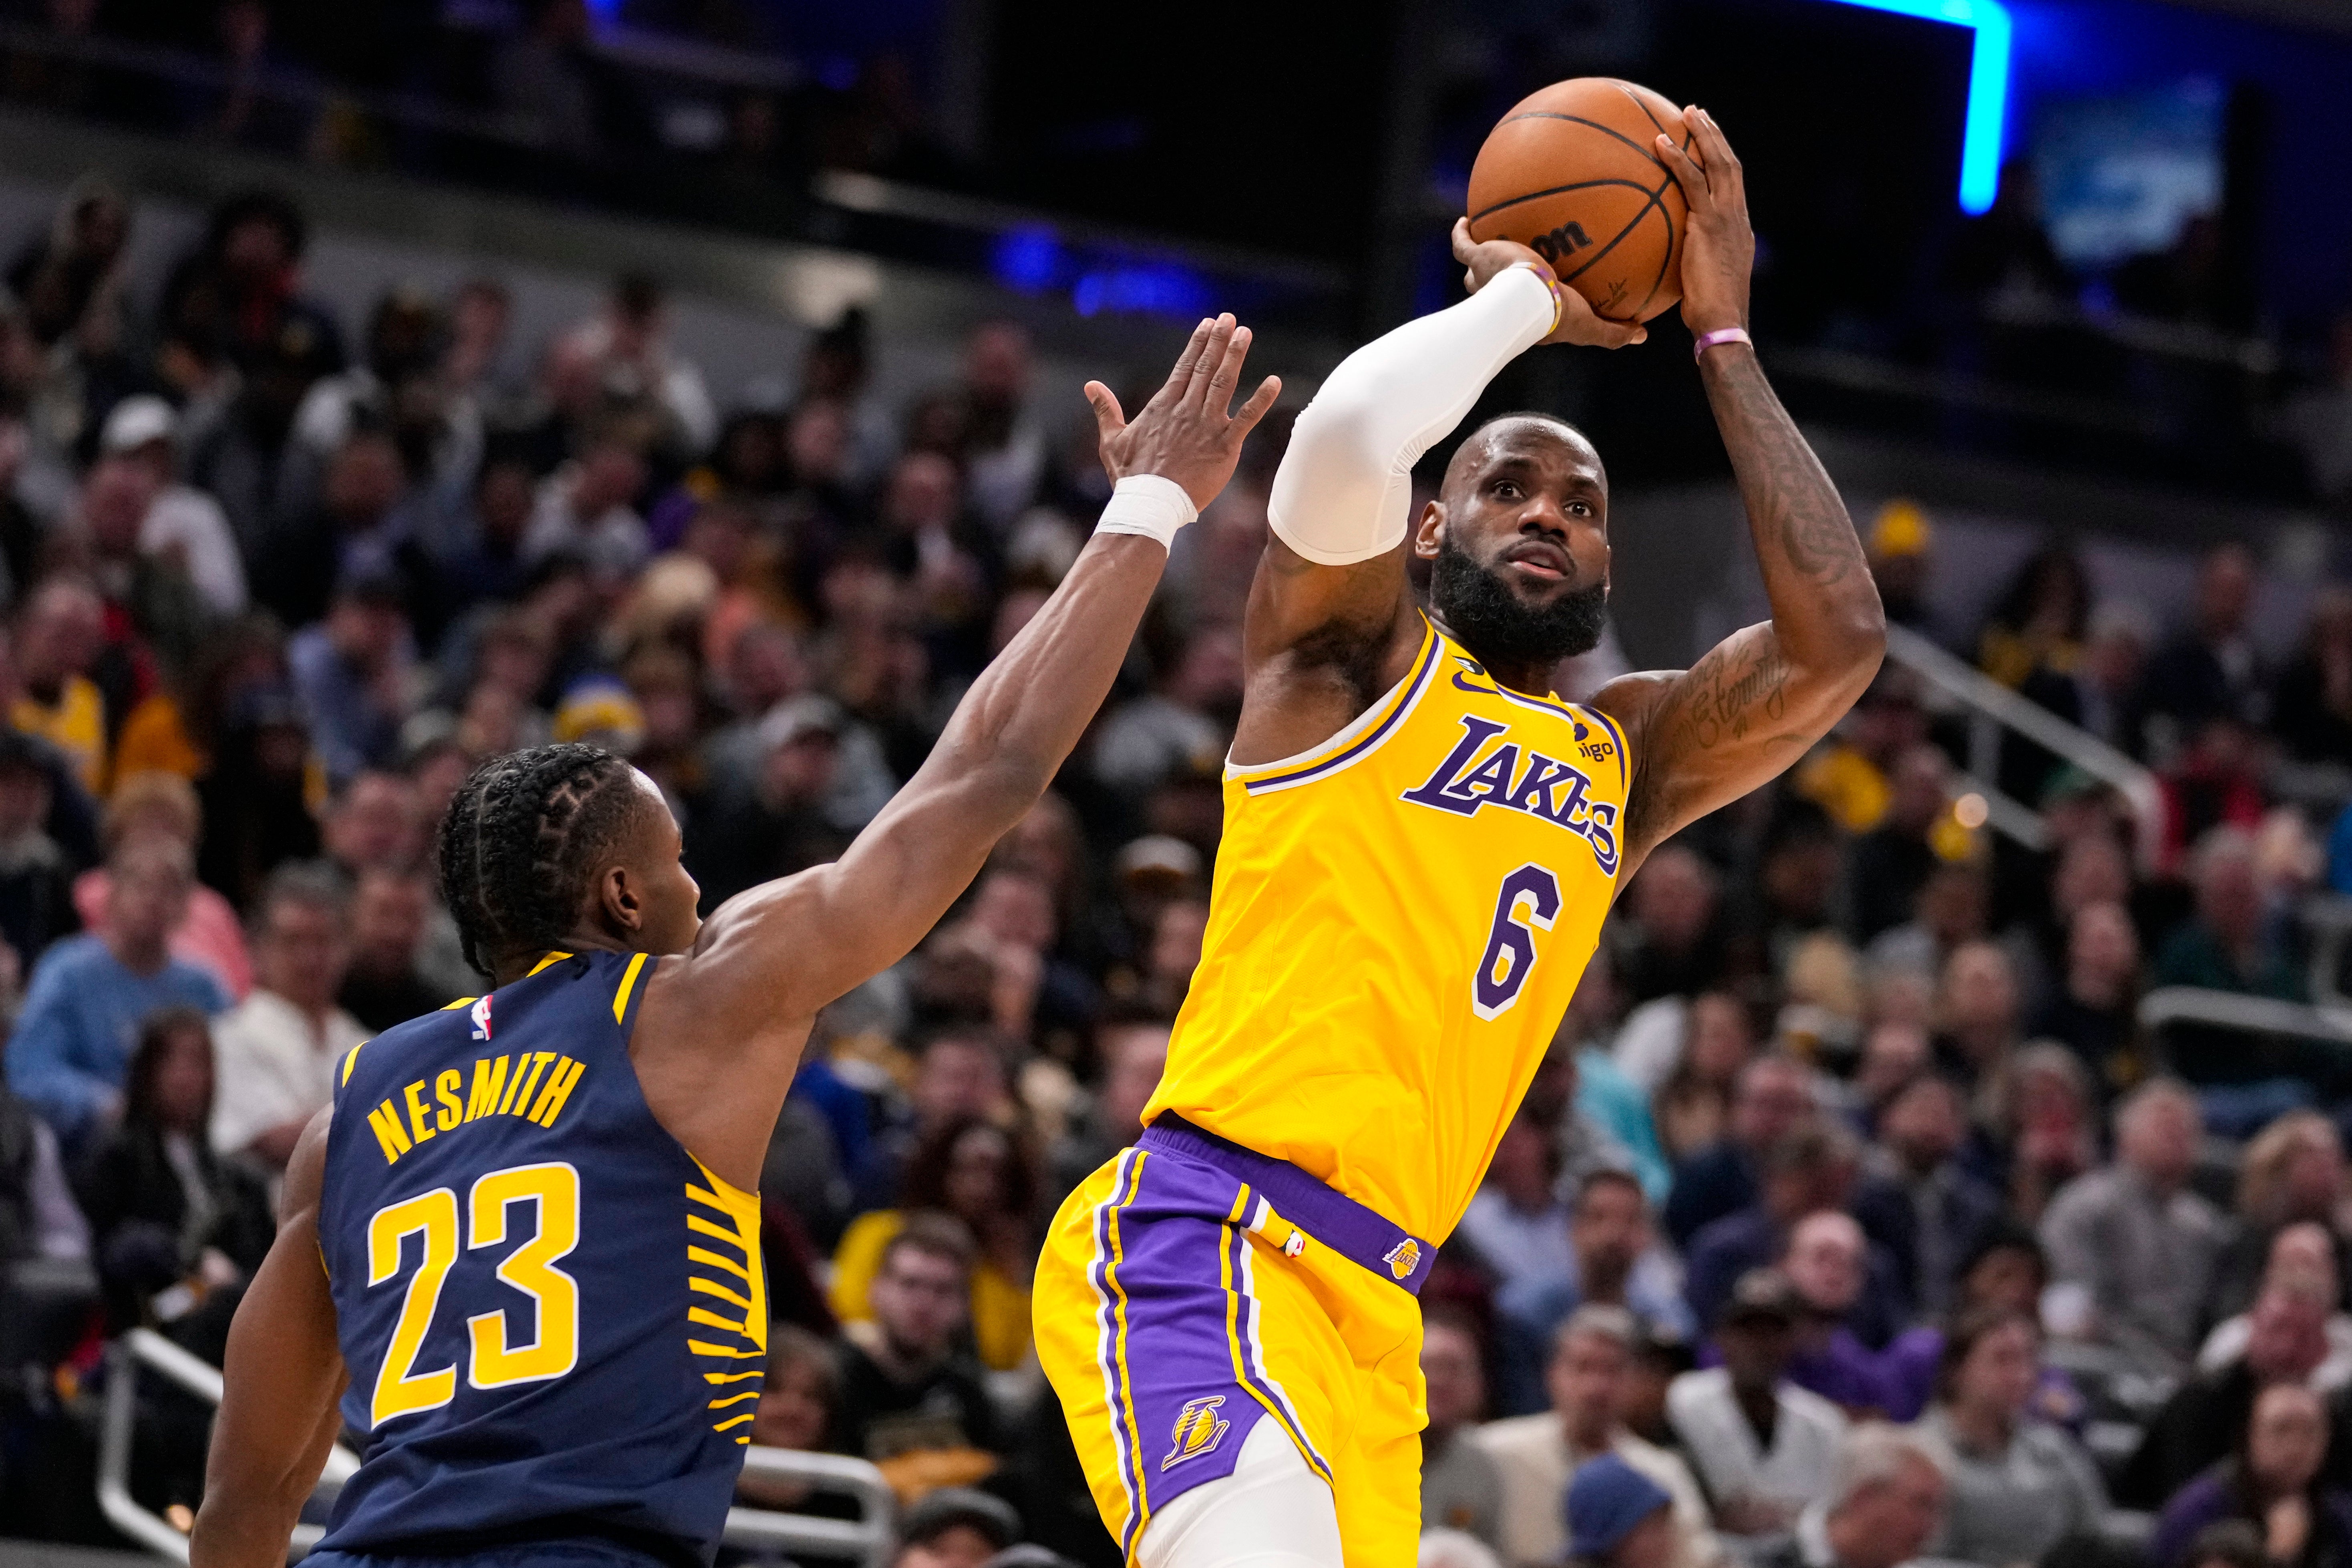 As James nears record, Tuesdays Lakers game moved to TNT The Independent